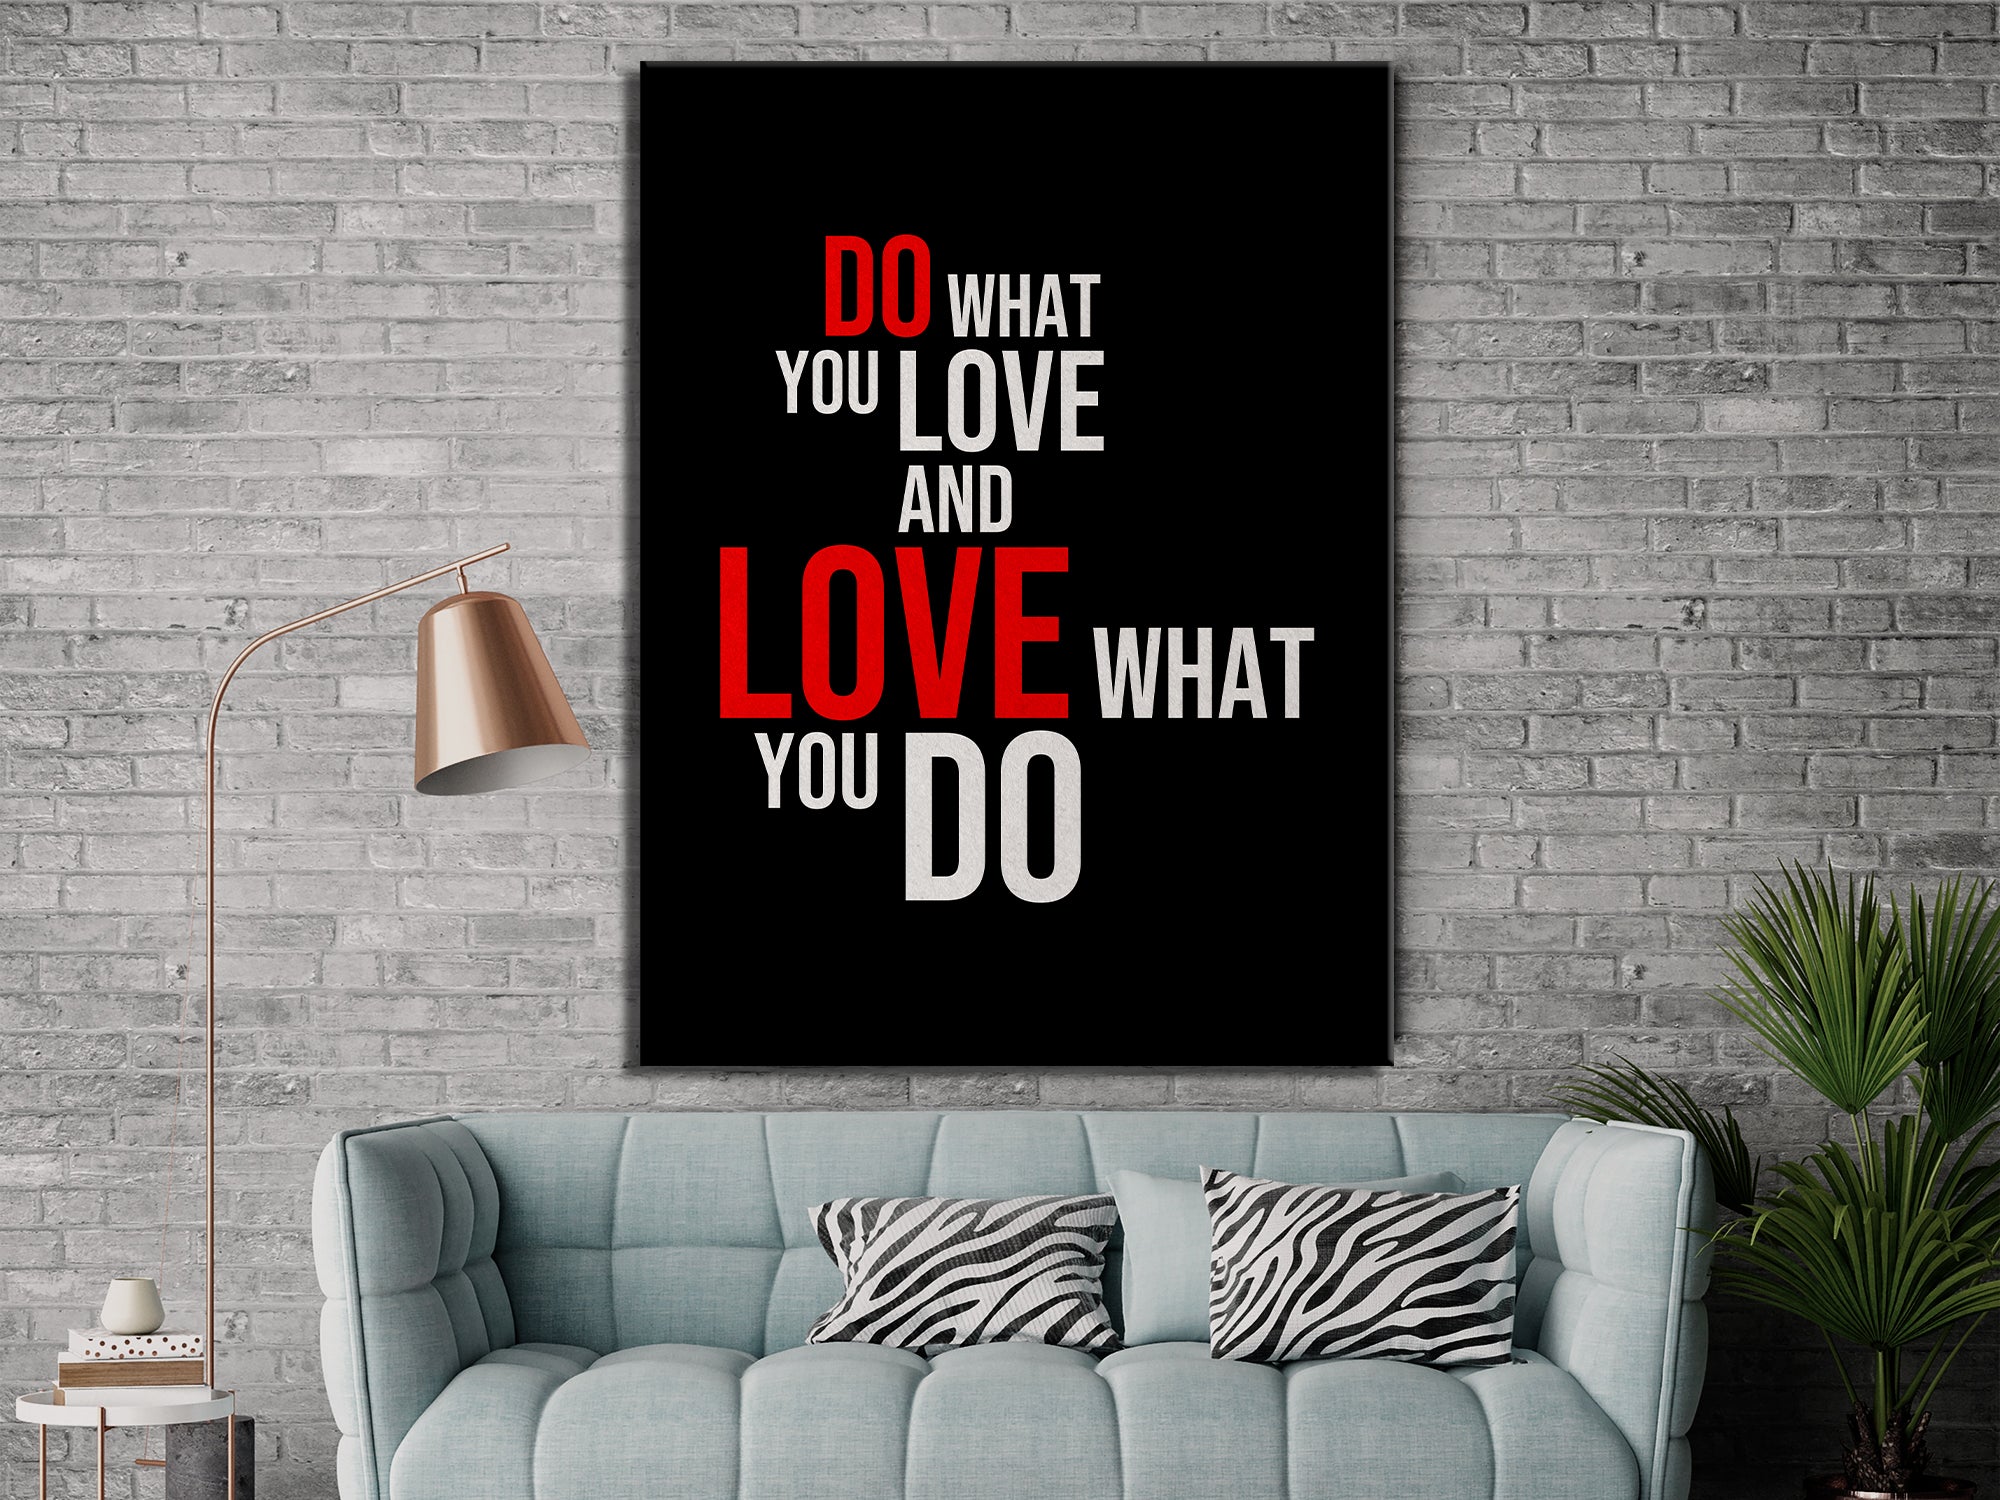 DO WHAT YOU LOVE - Motivational - Canvas Wall Art